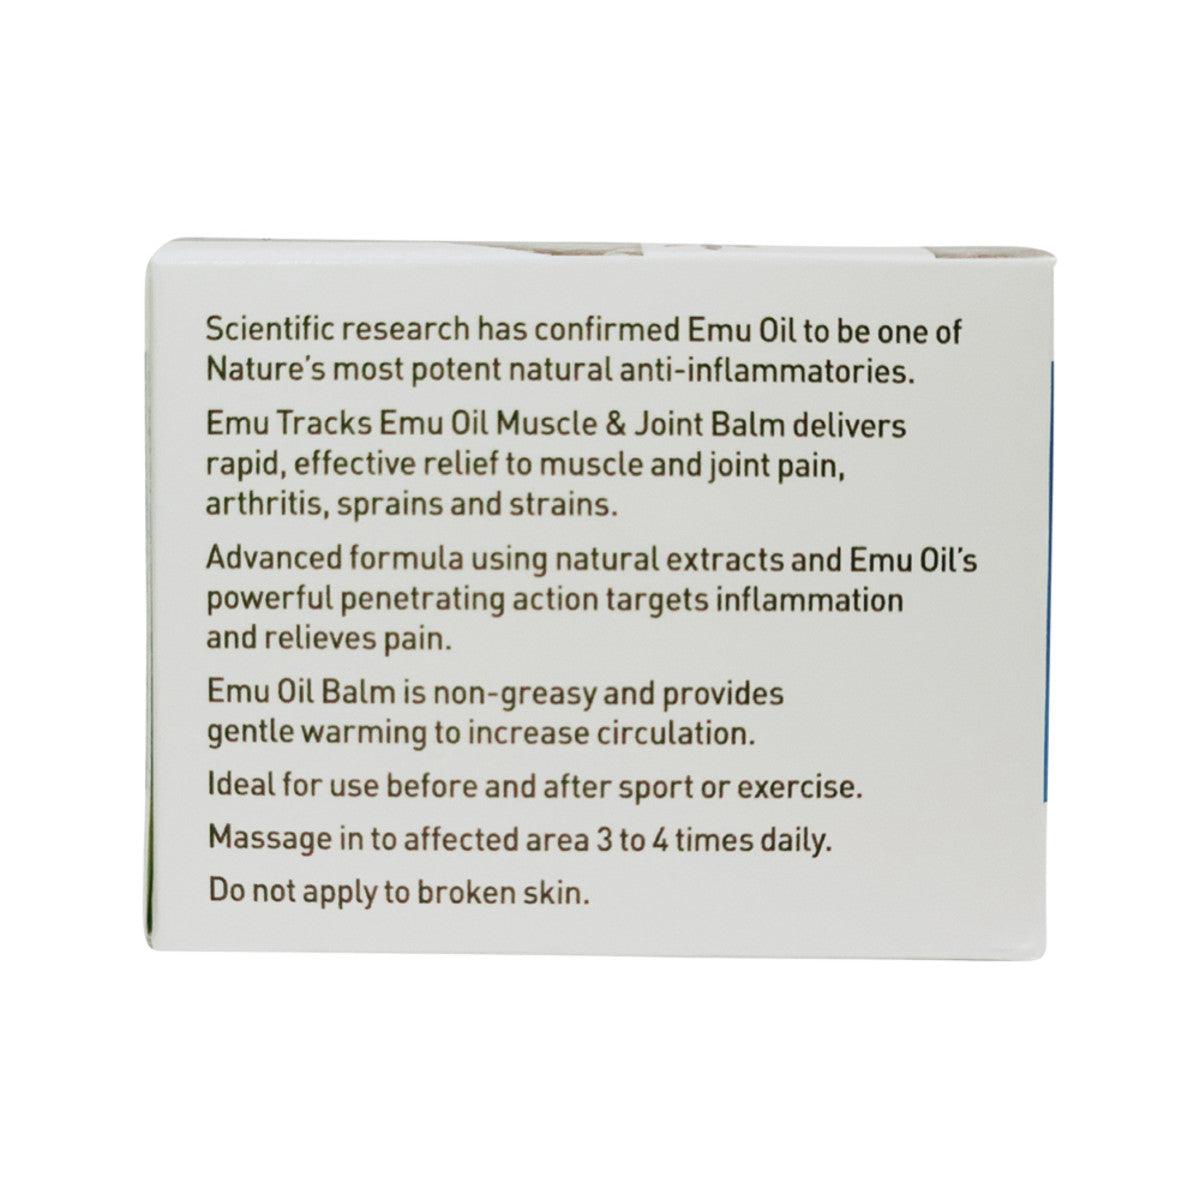 Emu Tracks Muscle and Joint Balm 50g - QVM Vitamins™